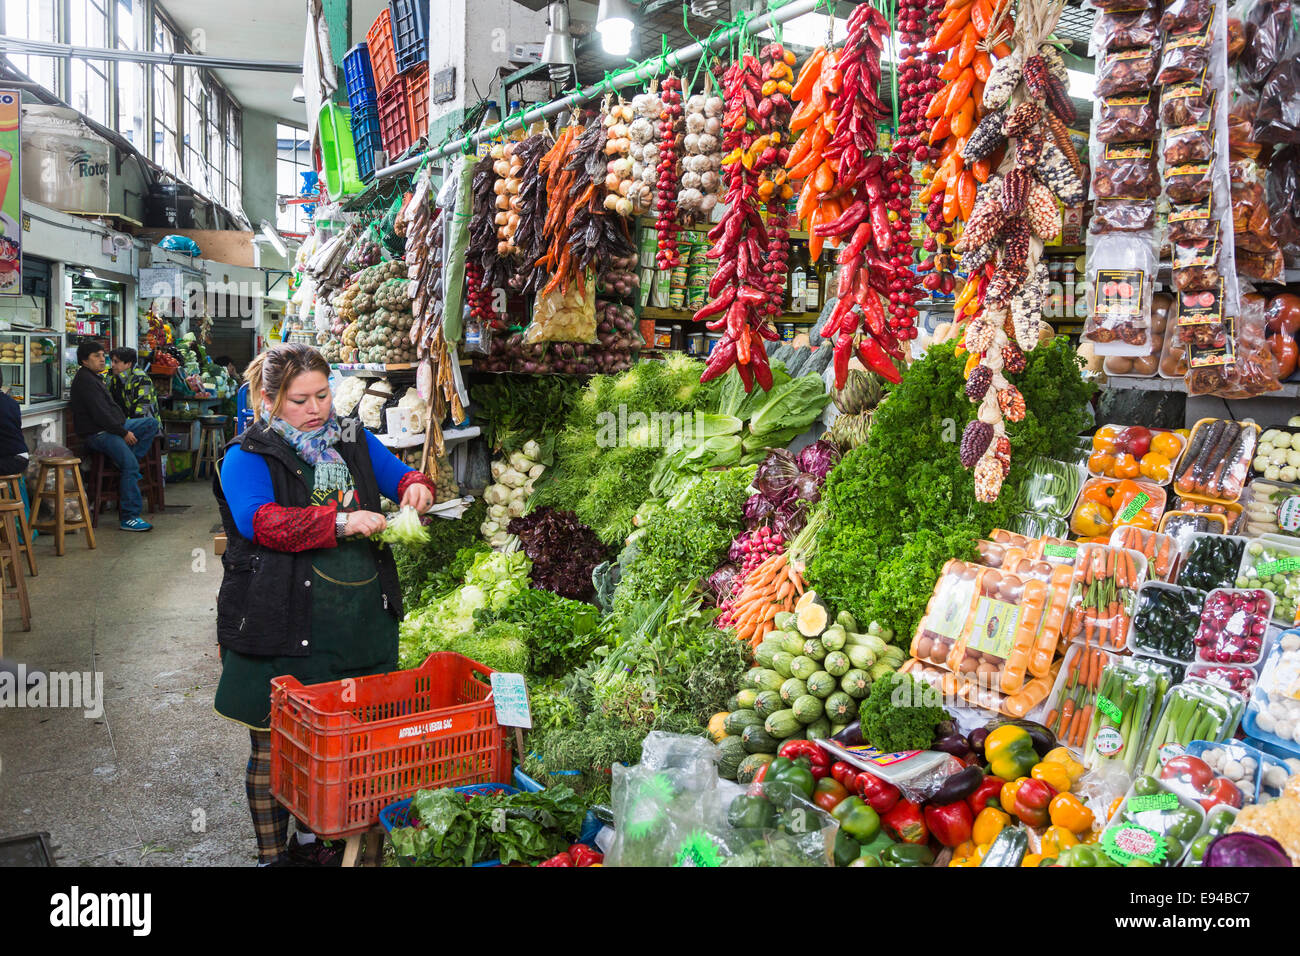 Local woman stallholder with typical colourful display of fresh peppers and vegetables at a stall at Surquillo Market, Miraflores, Lima, Peru Stock Photo